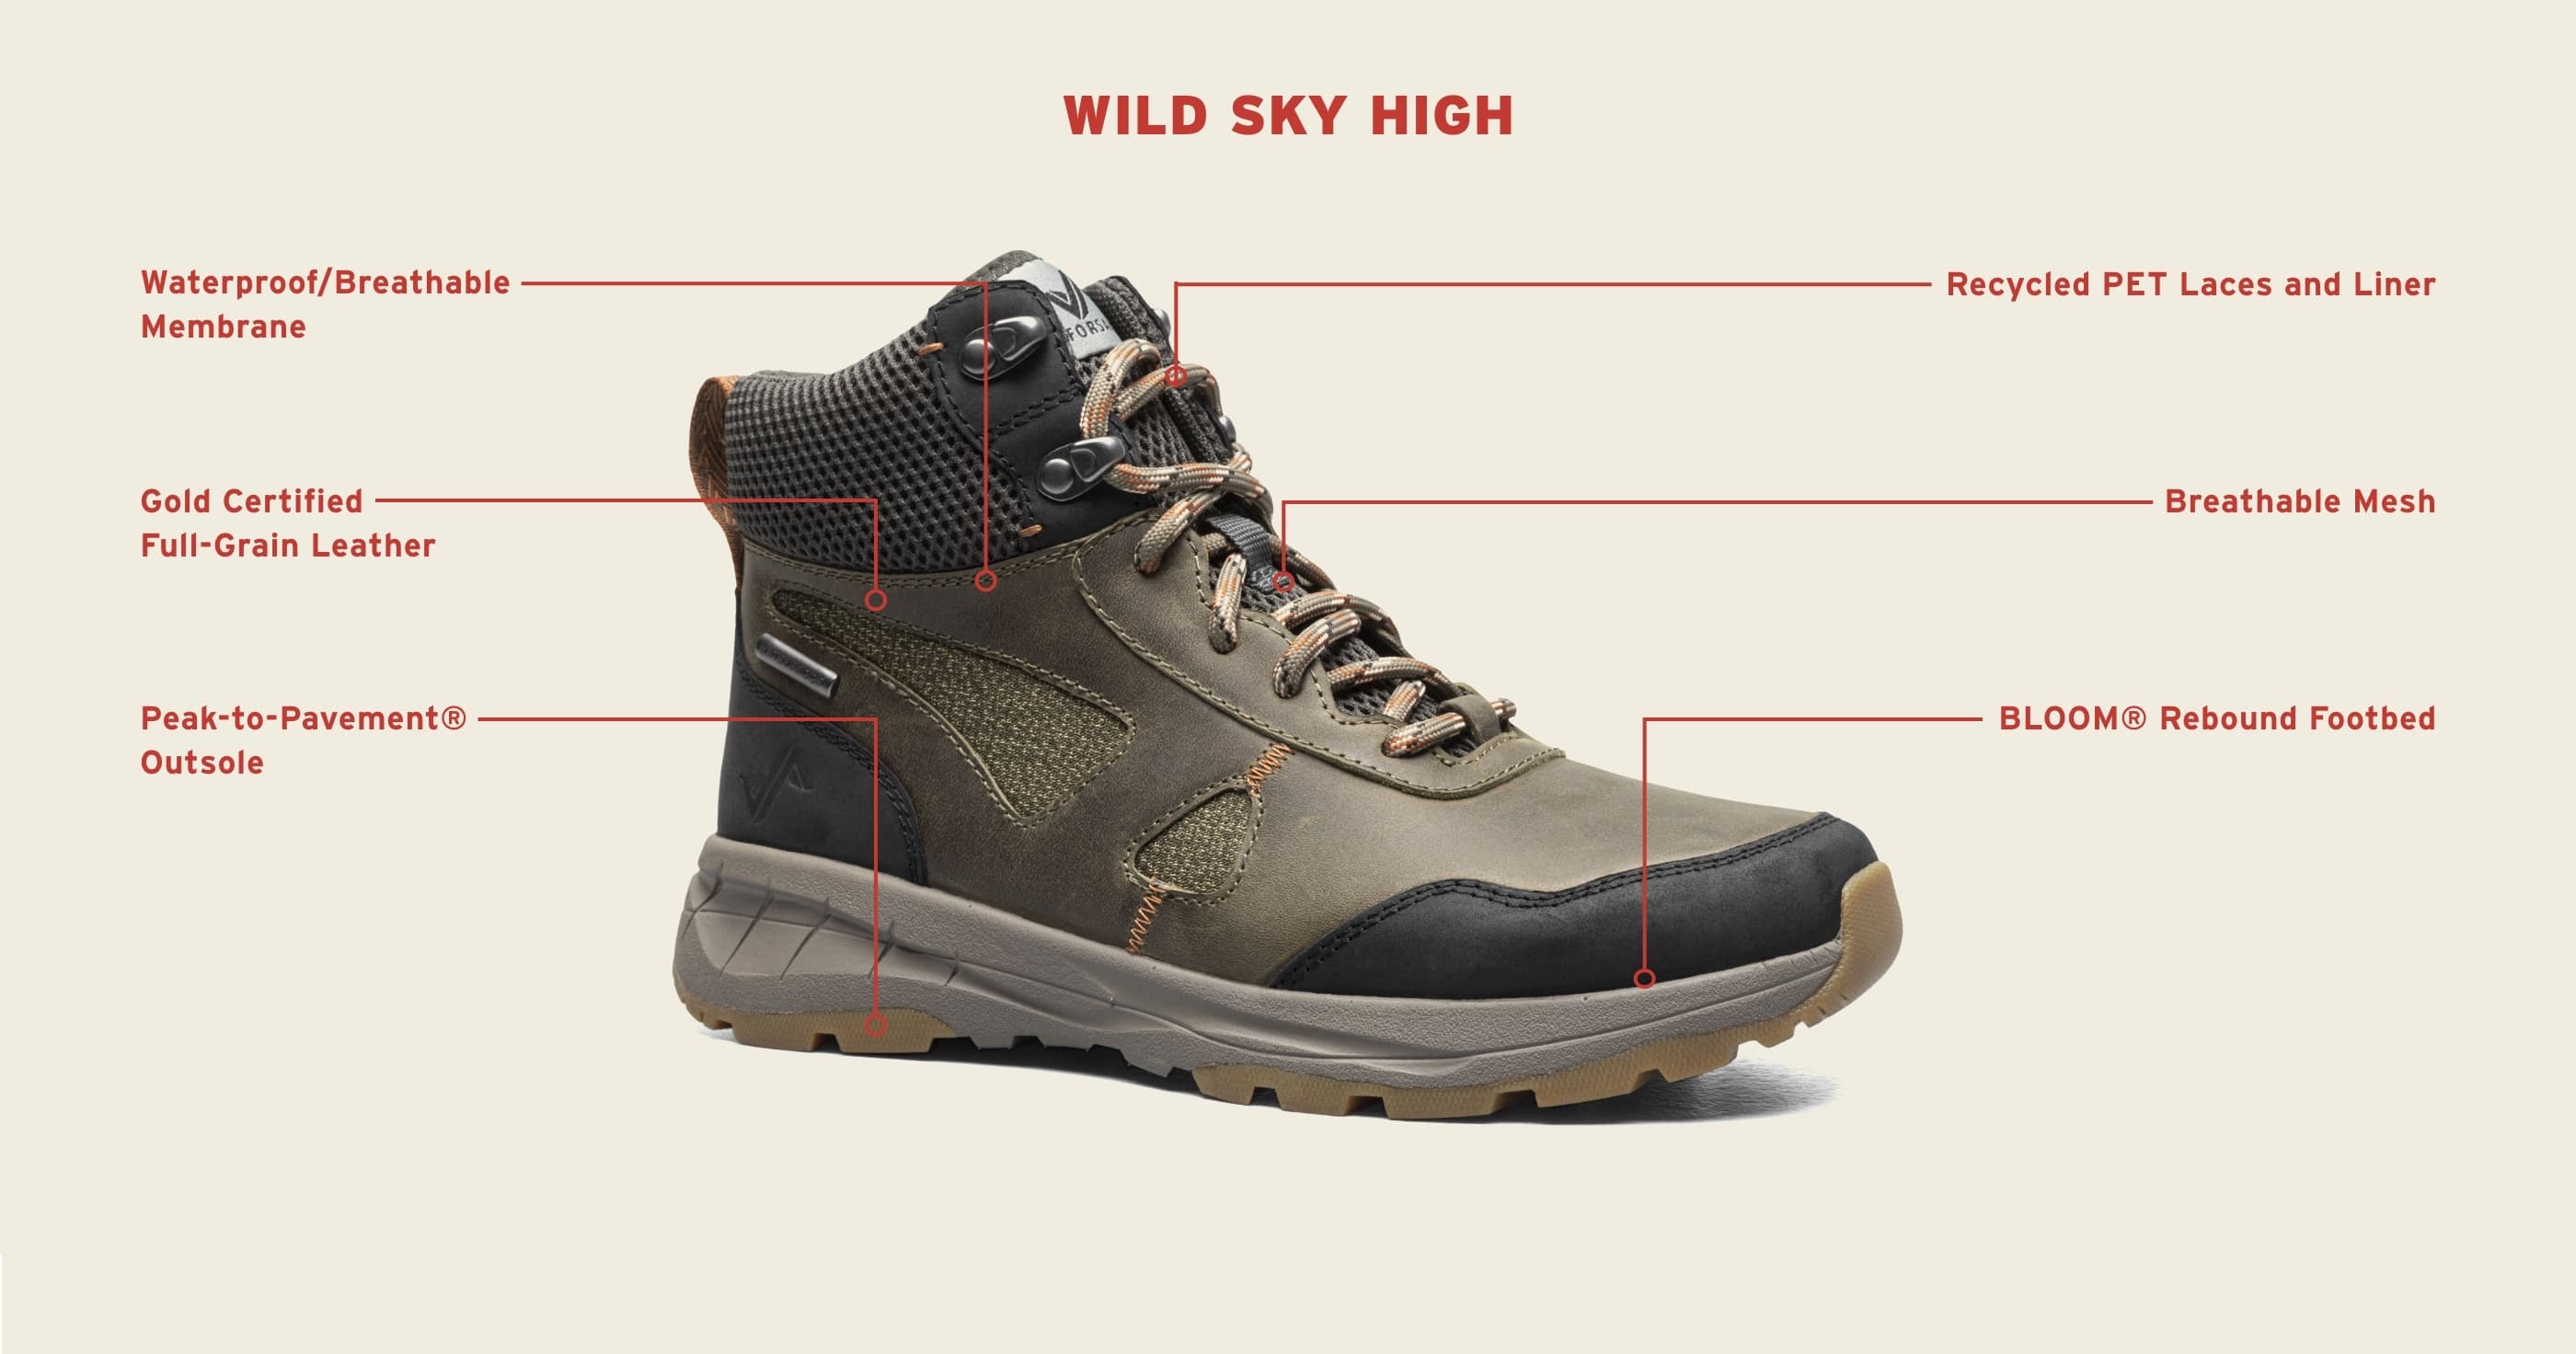 Click to shop the women's Wild Sky High. Image features the tech callouts for this style.